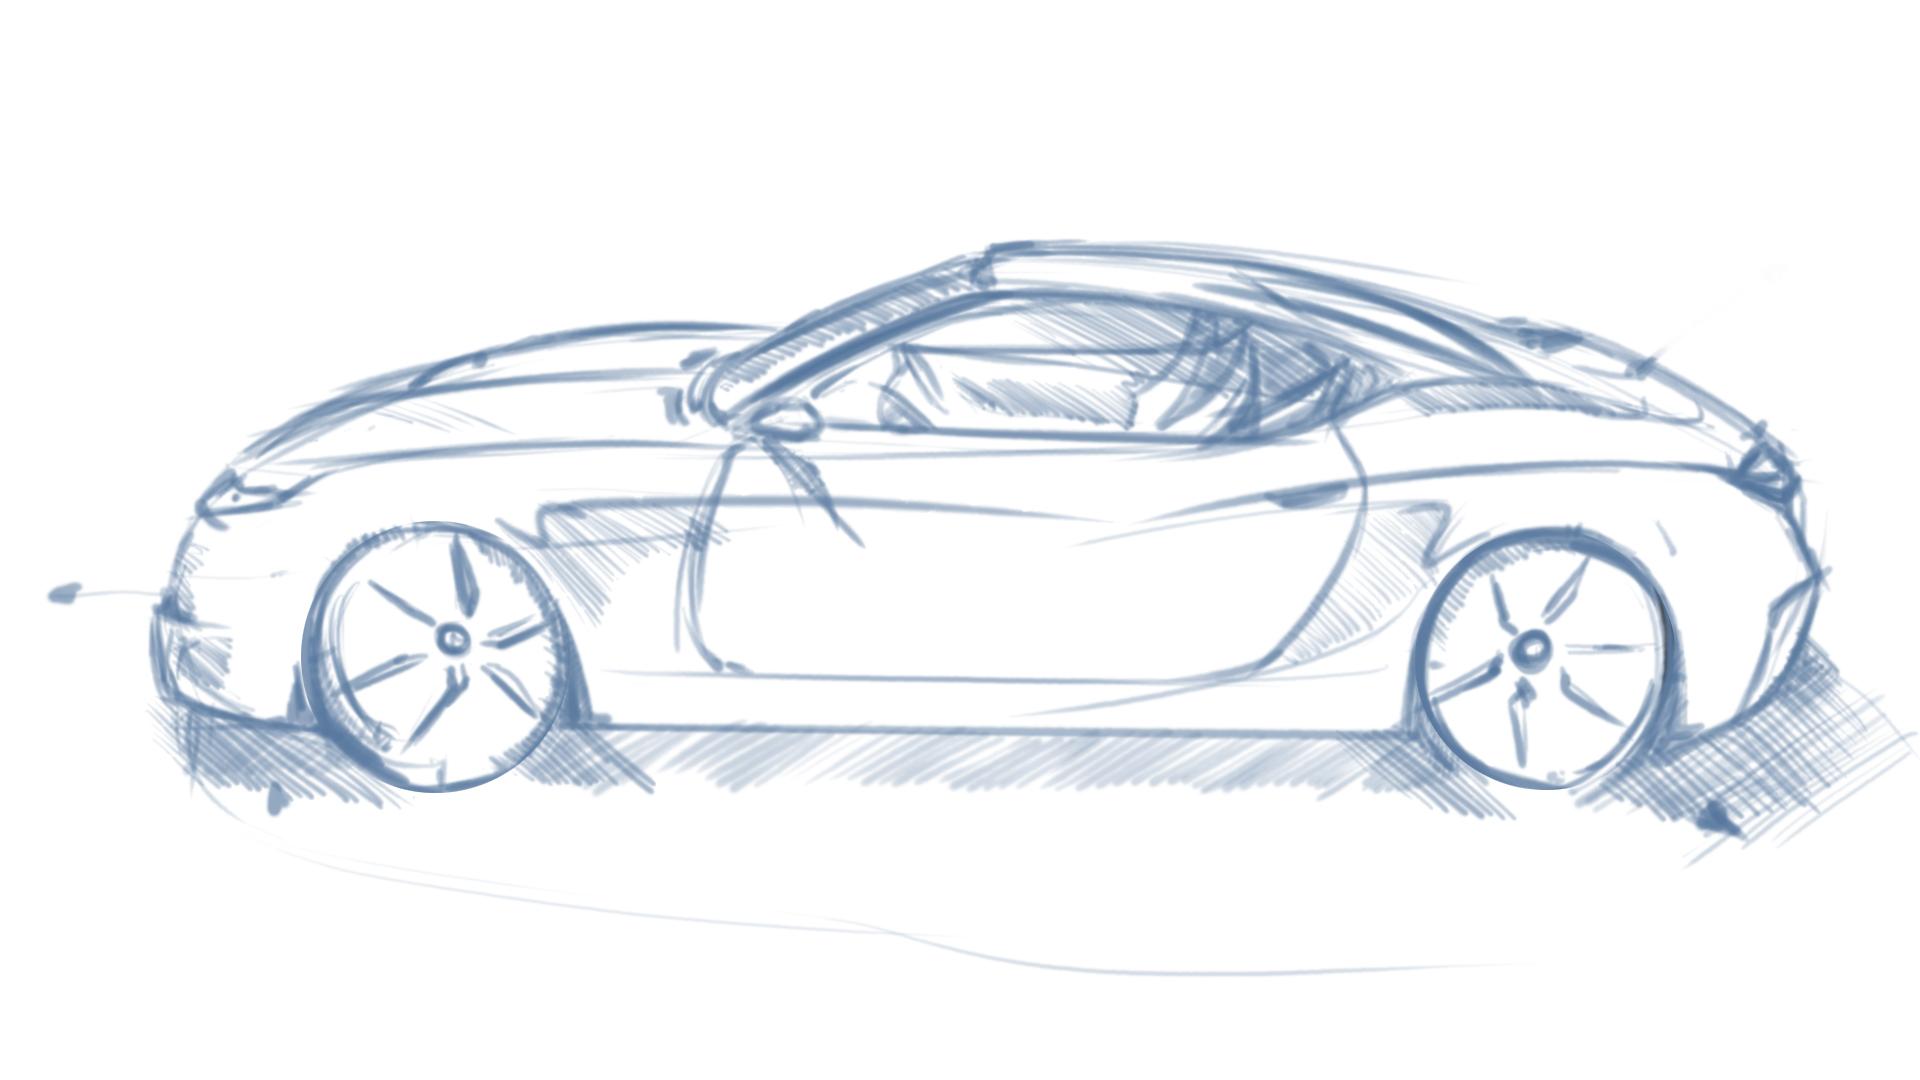 Car Perspective Drawing  Car Body Design  Perspective sketch Car  drawings Drawings